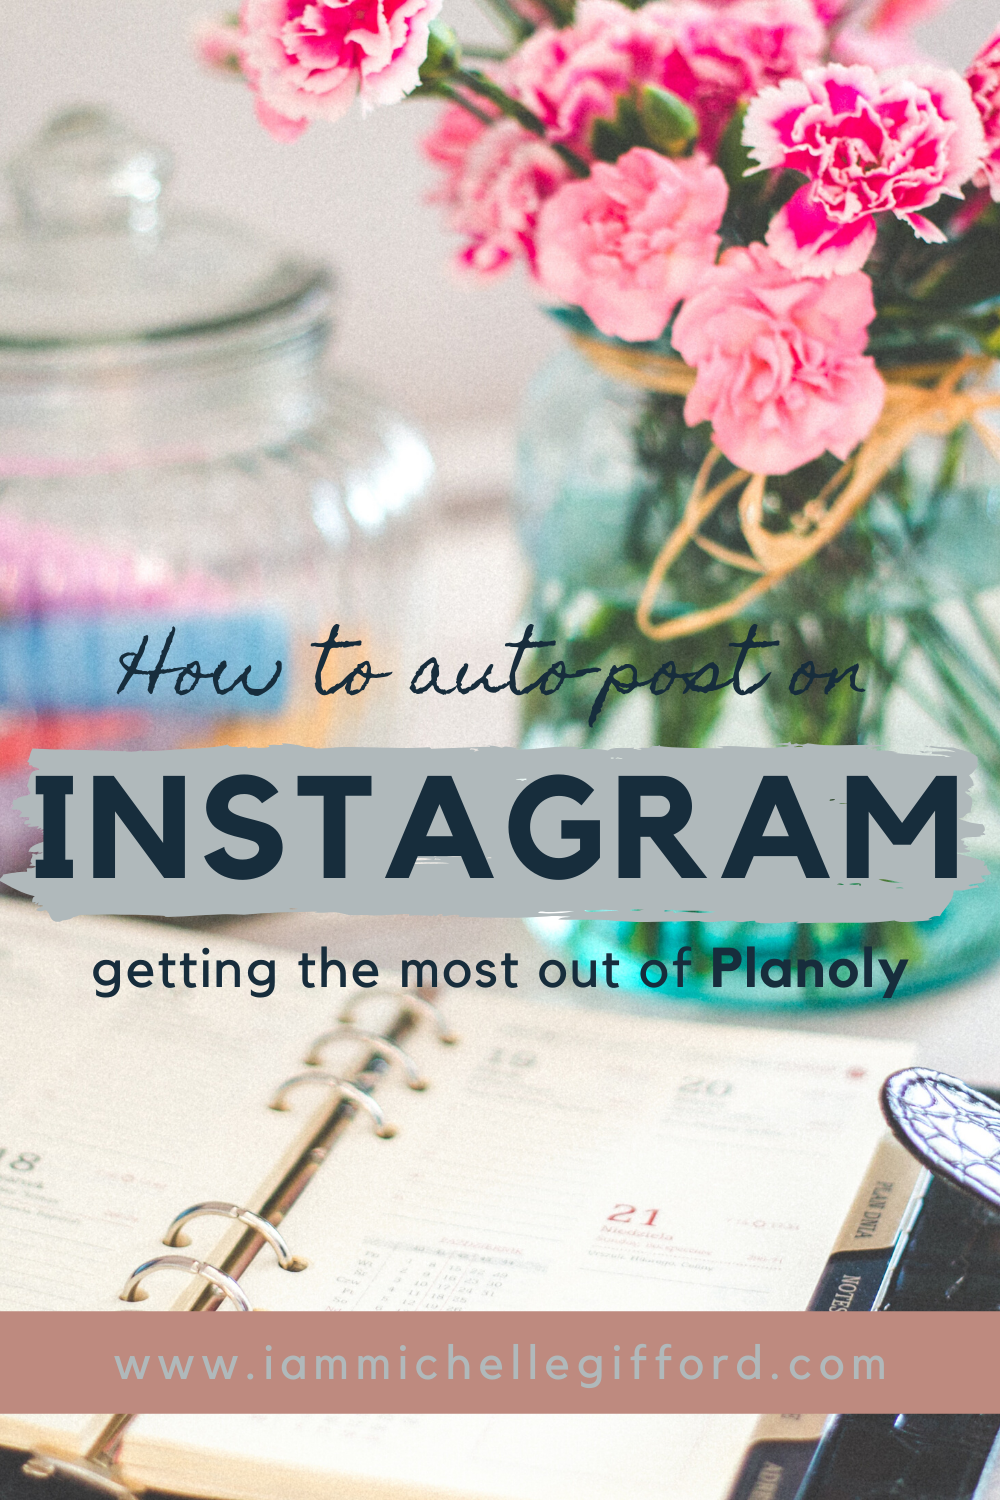 How to use planoly to schedule instagram Get the most by using auto-post www.iammichellegifford.com